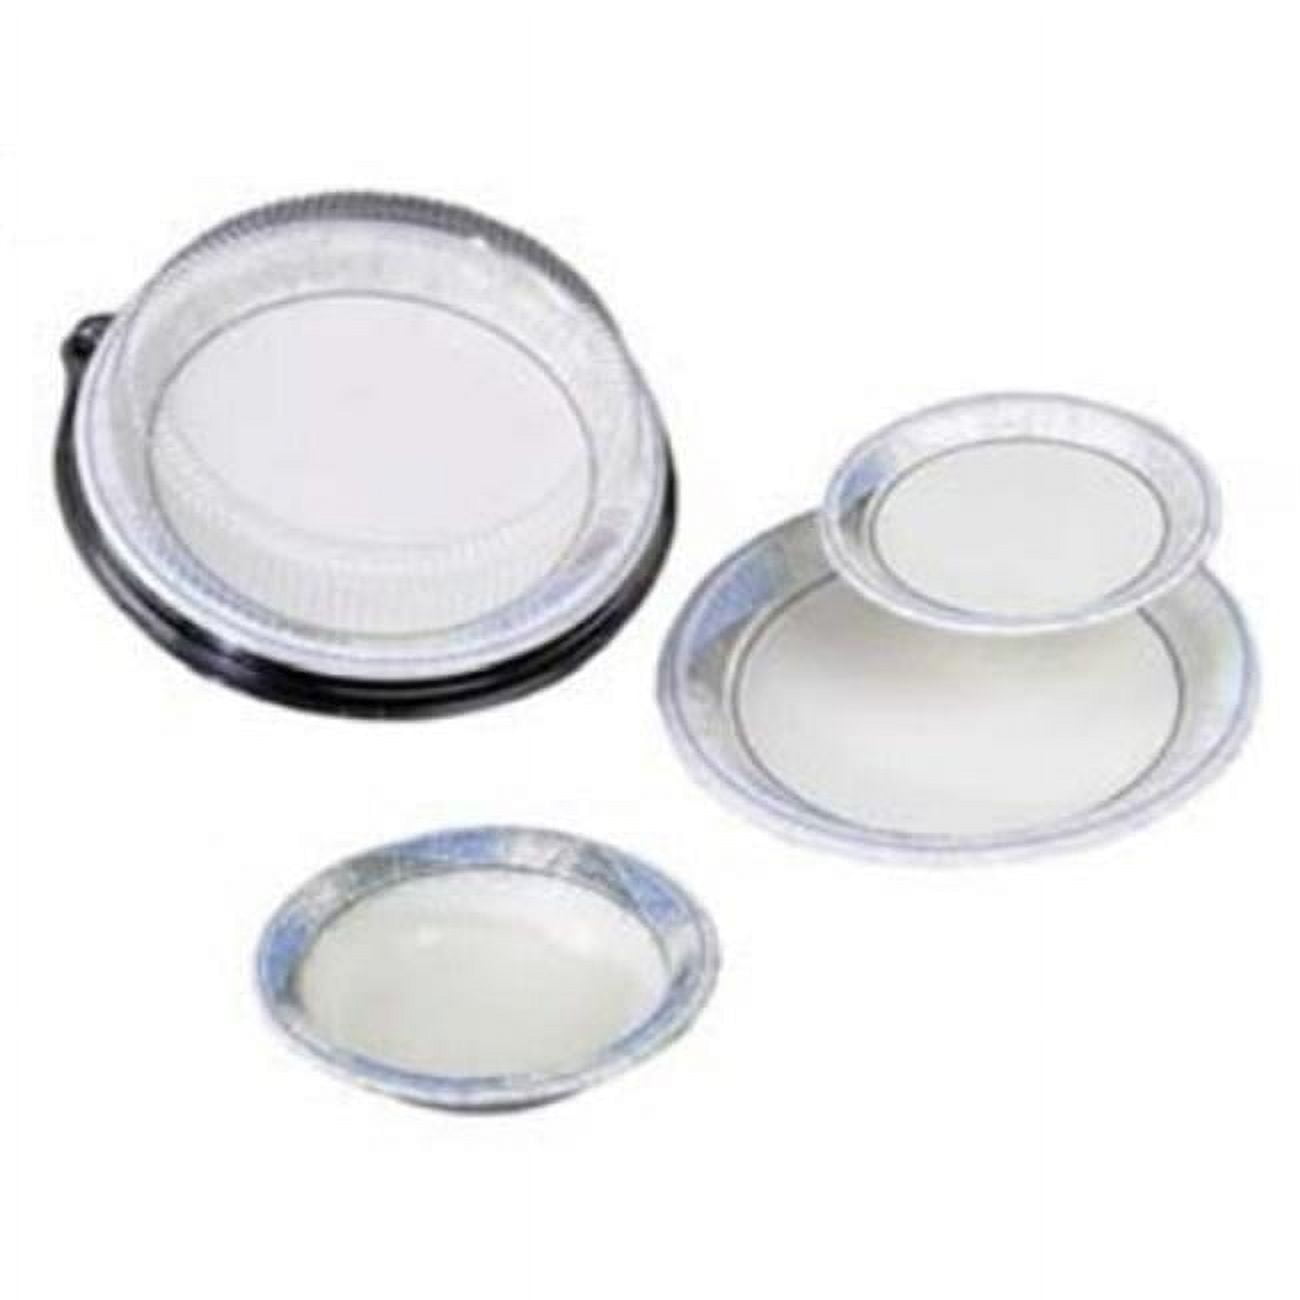 Prime Source 75002108 Cpc 9 In. Envy Clay Coated Paper Plate - Case Of 1000